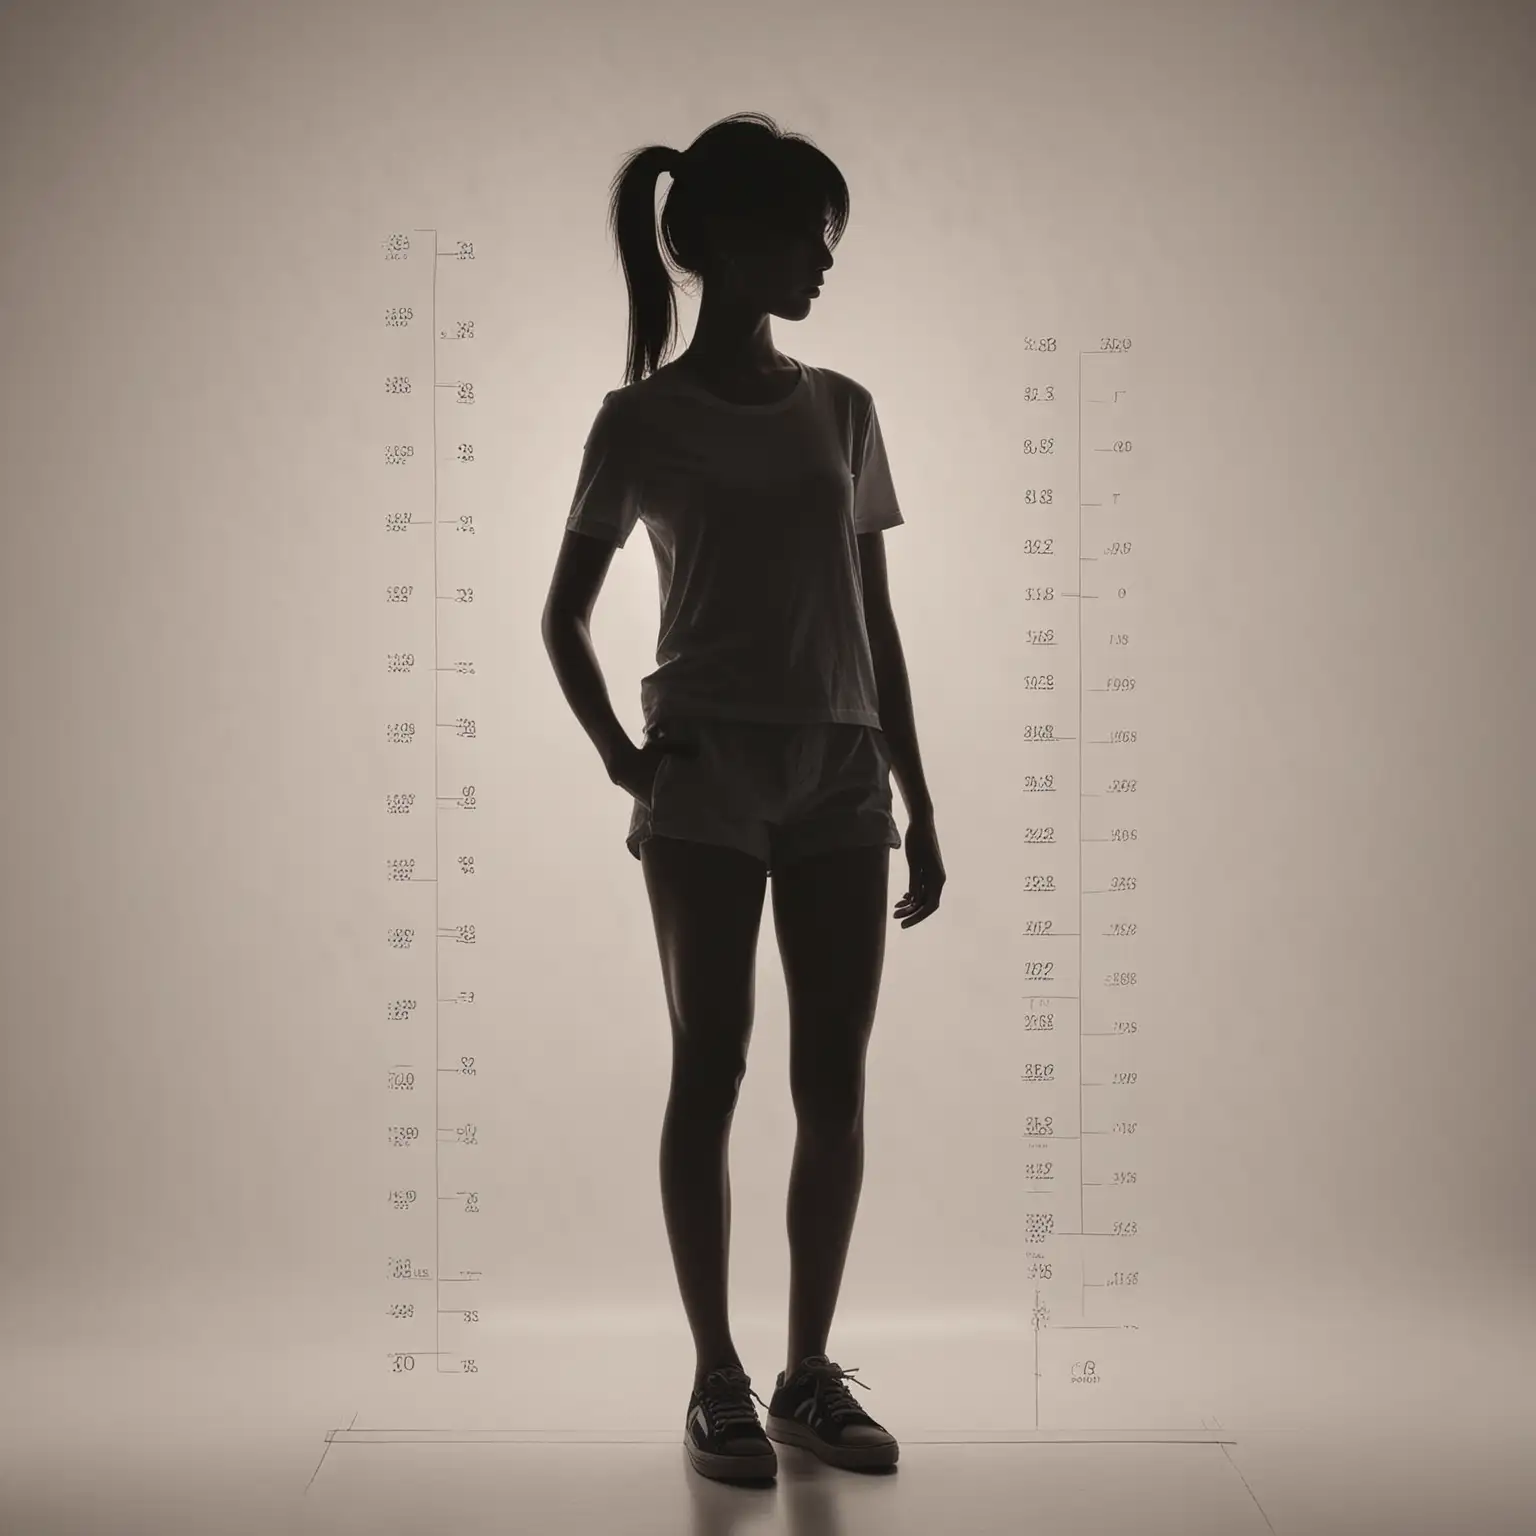 a female silhouette, 穿短袖和短裤, standing upright, facing me ，with a height chart